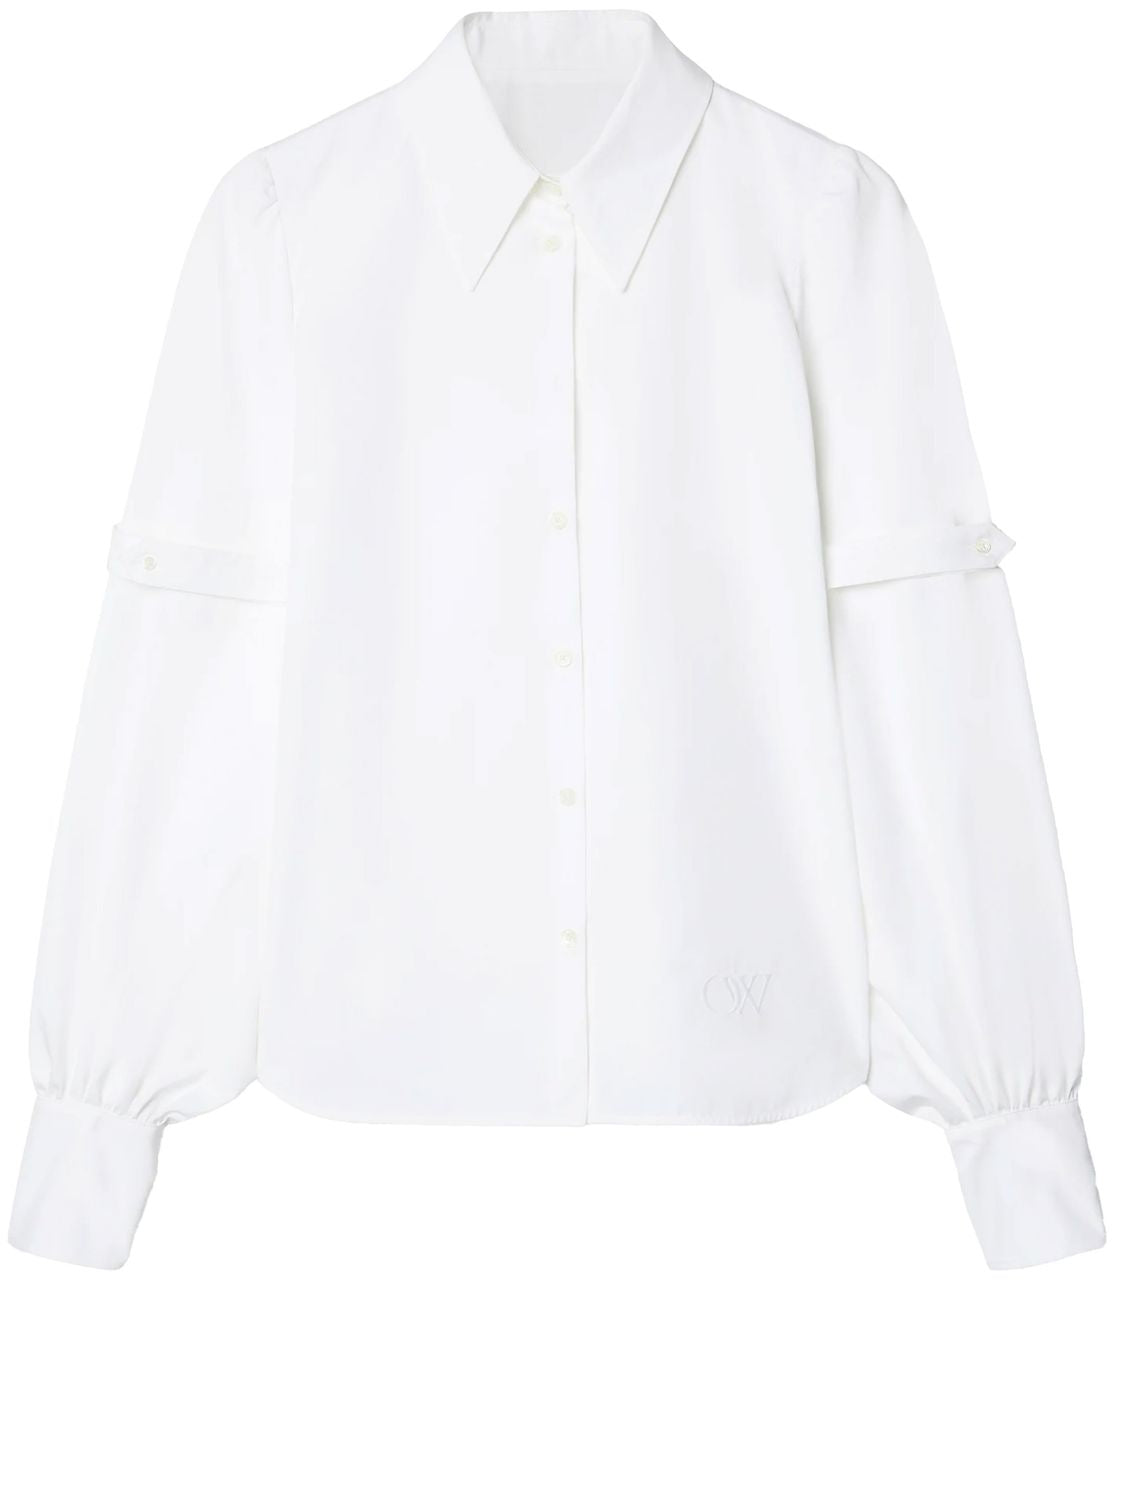 OFF-WHITE White Cotton Poplin Shirt with Straps and OW Embroidery